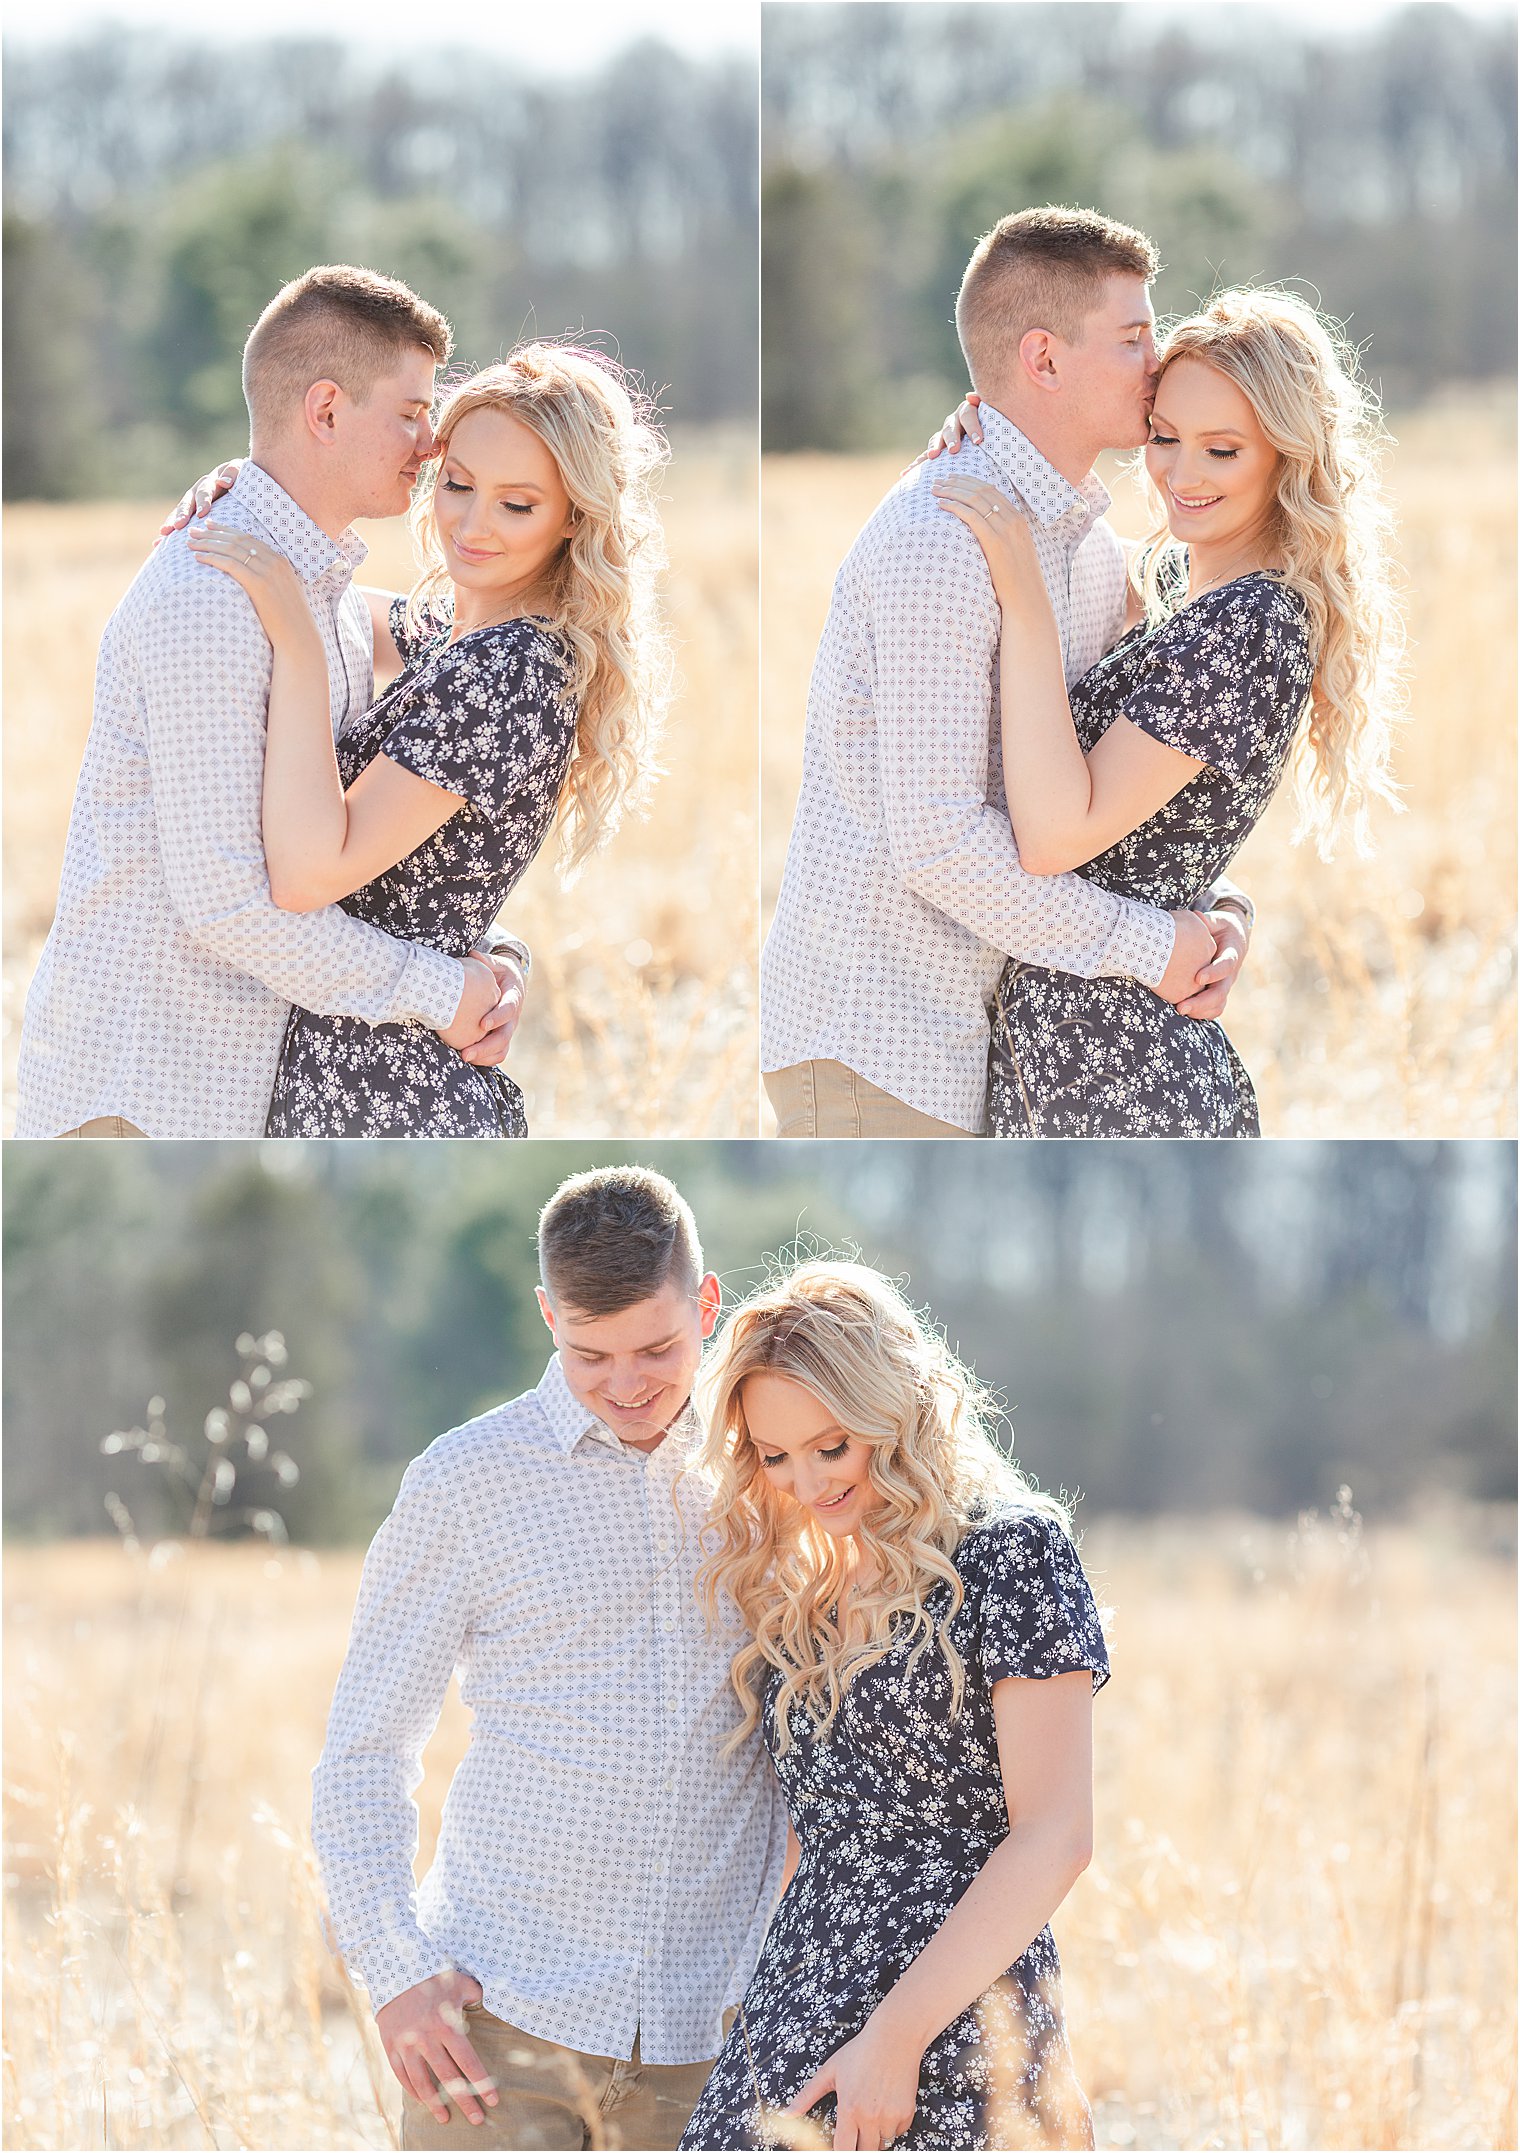 Couple holding each other close during Engagement Session